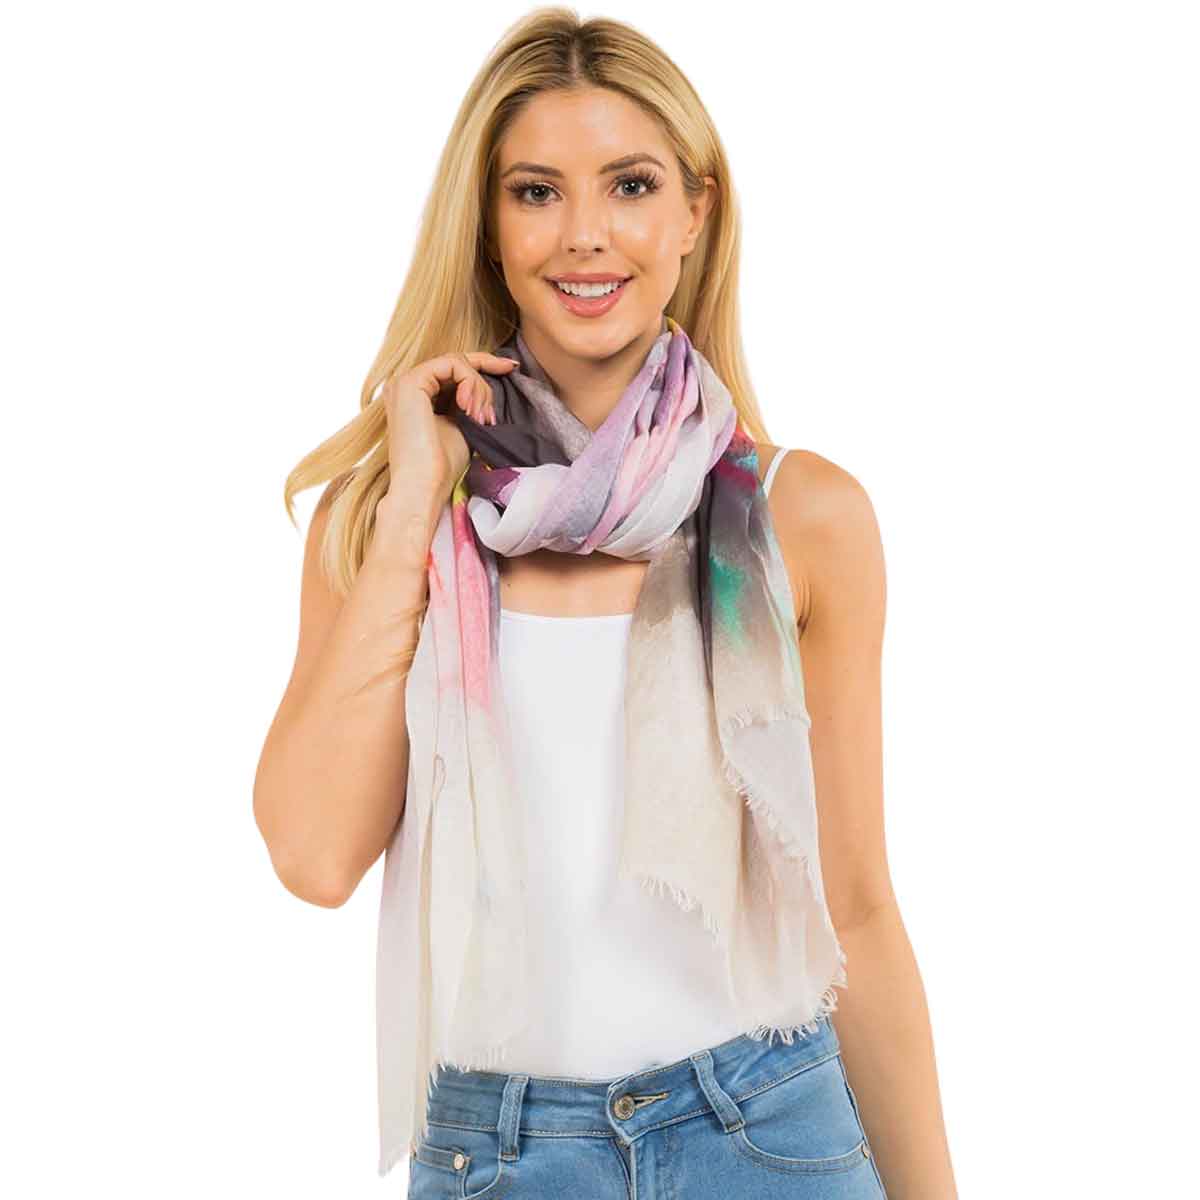 3861 - Assorted Cotton Feel Summer Scarves 0002 - 02<br>
Watercolor Tie Dyed Scarf - 33